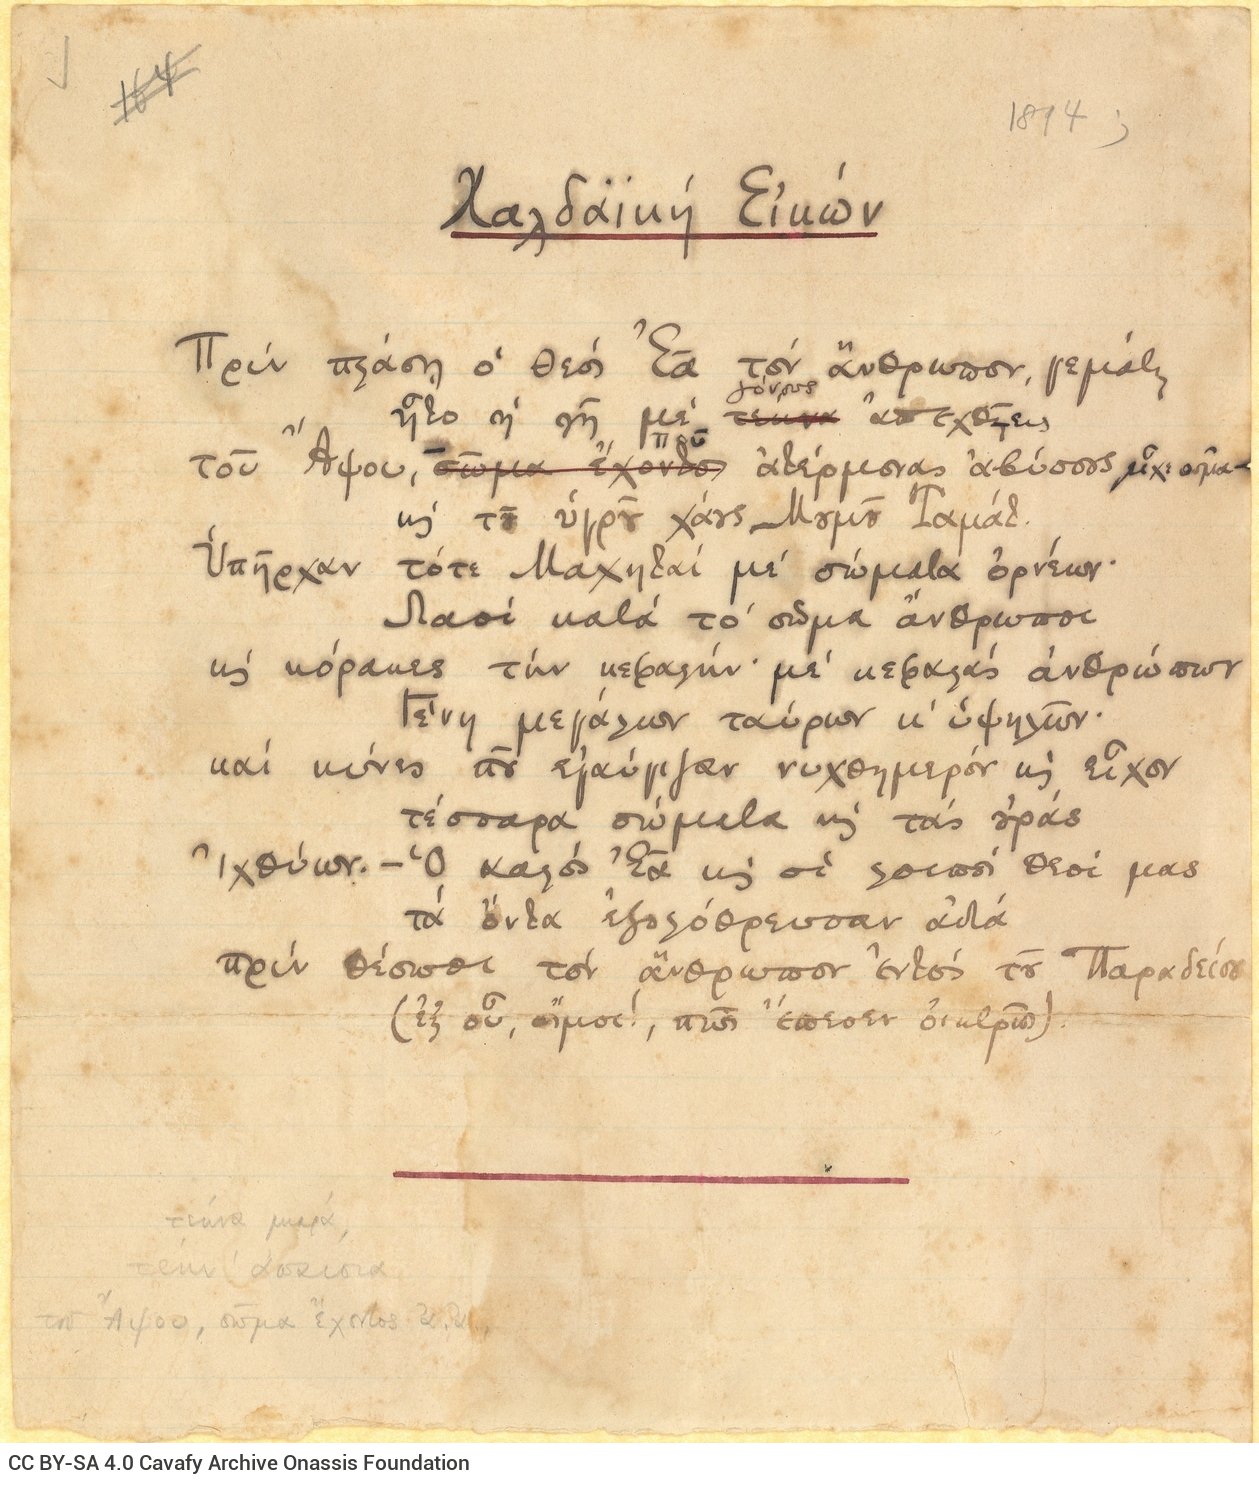 Two sheets initially affixed and subsequently detached. On one side of the ruled first sheet, the manuscript of the poem "